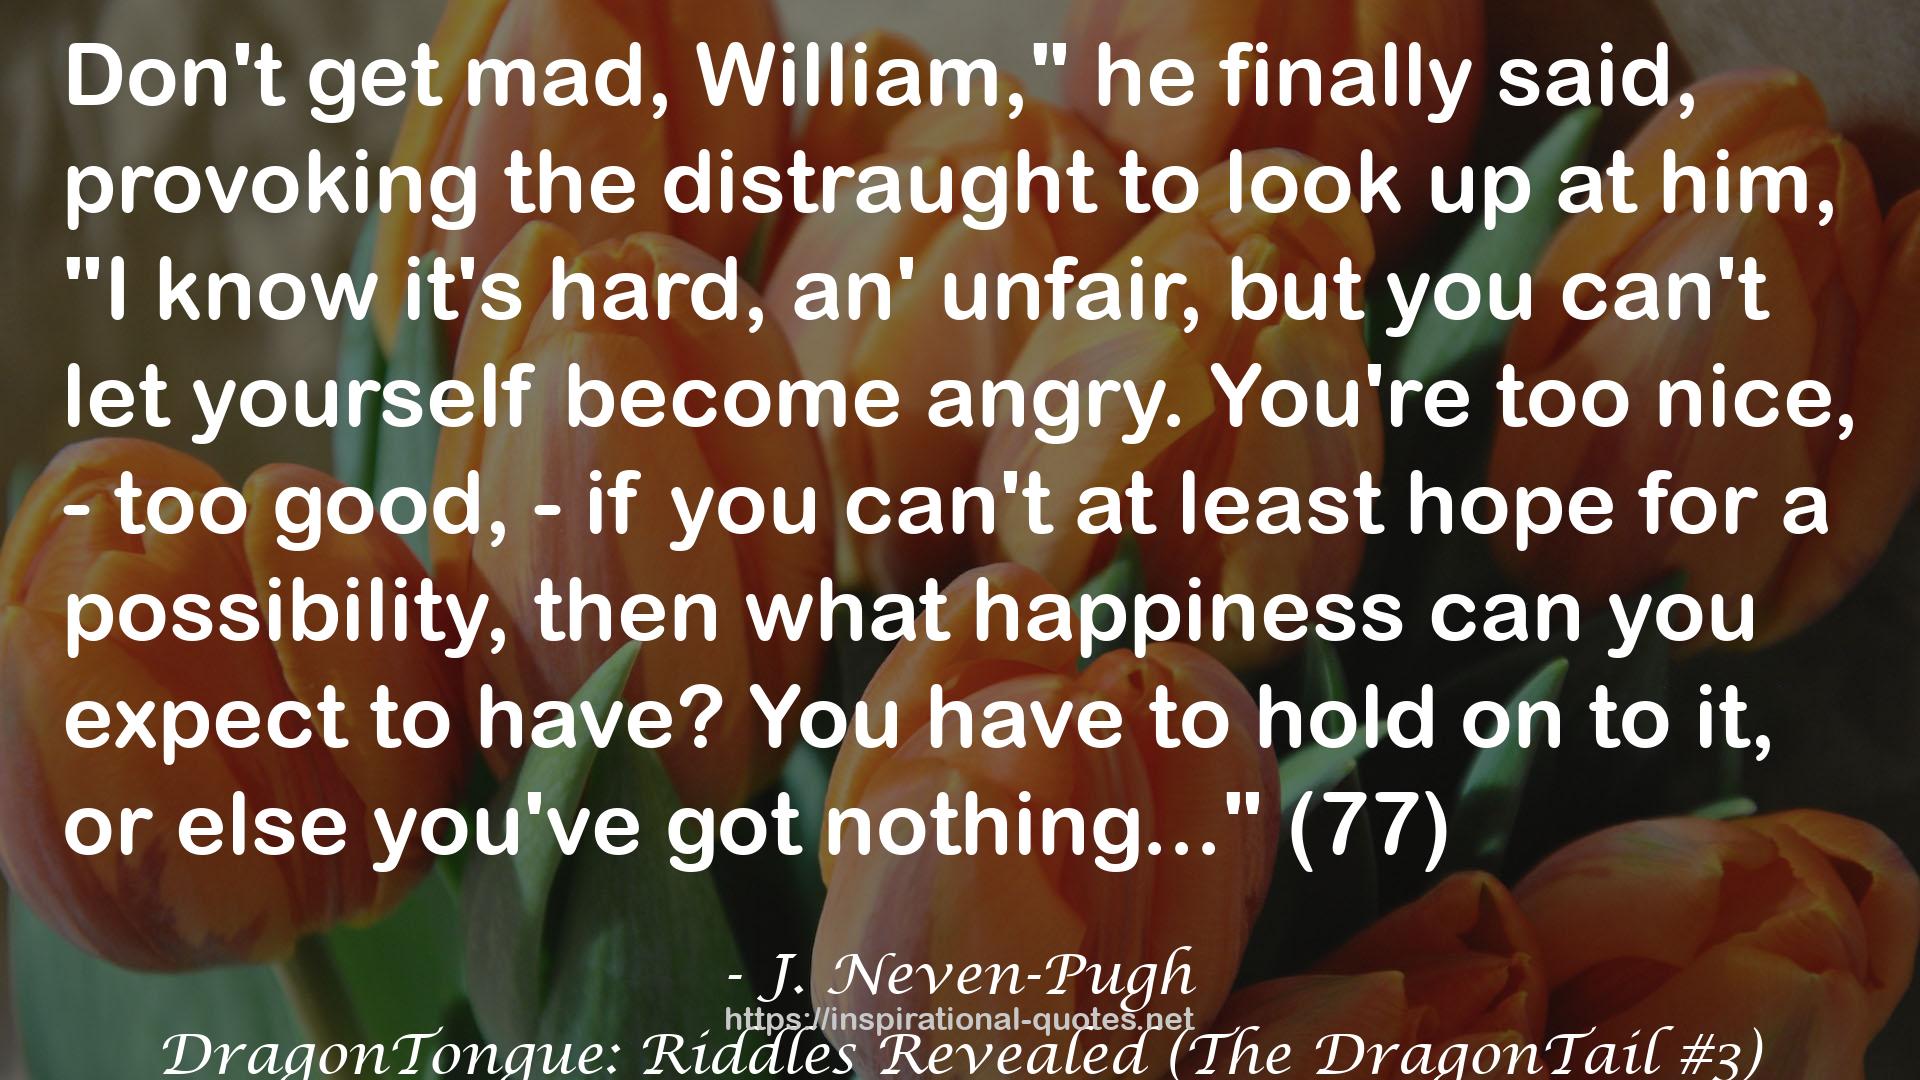 DragonTongue: Riddles Revealed (The DragonTail #3) QUOTES